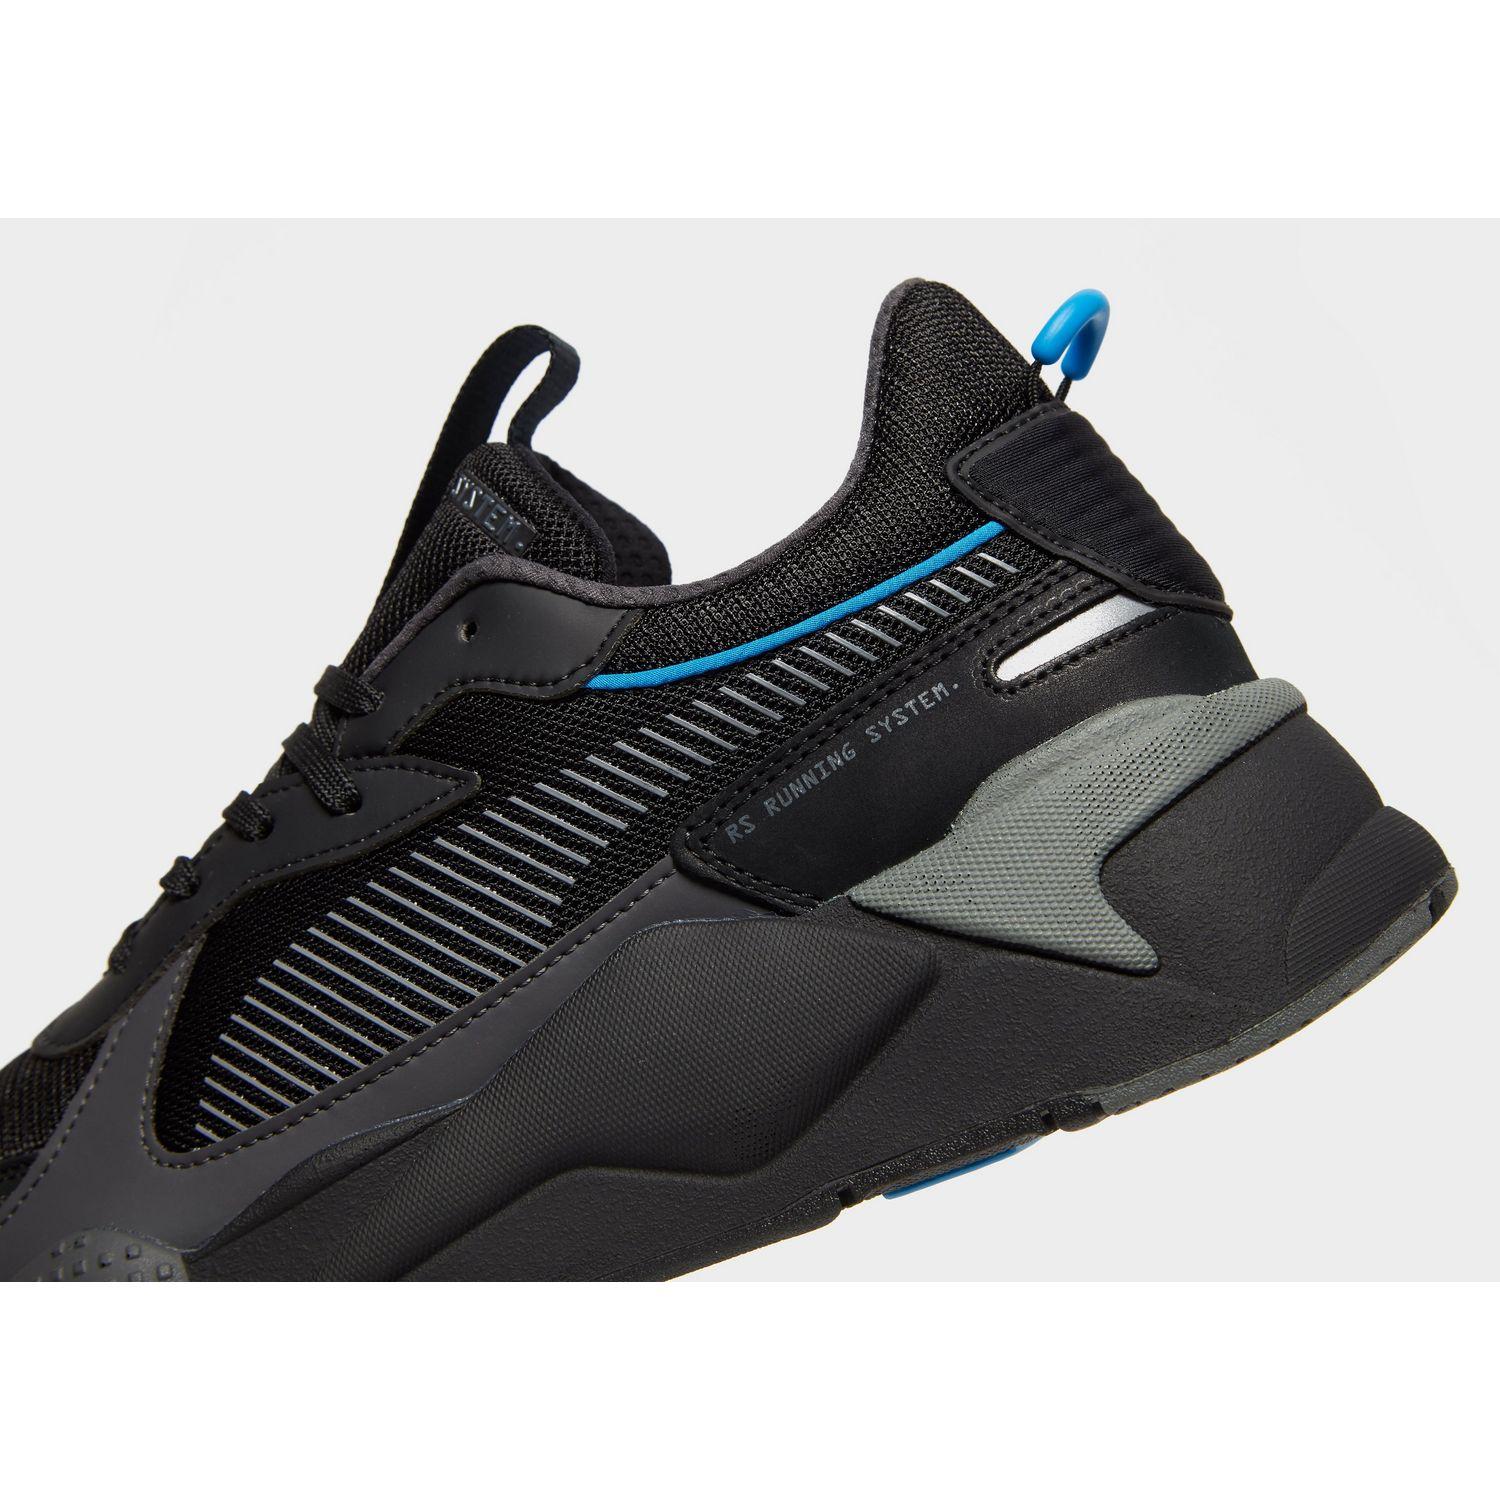 PUMA Synthetic Rs-x Cr in Black/Blue 